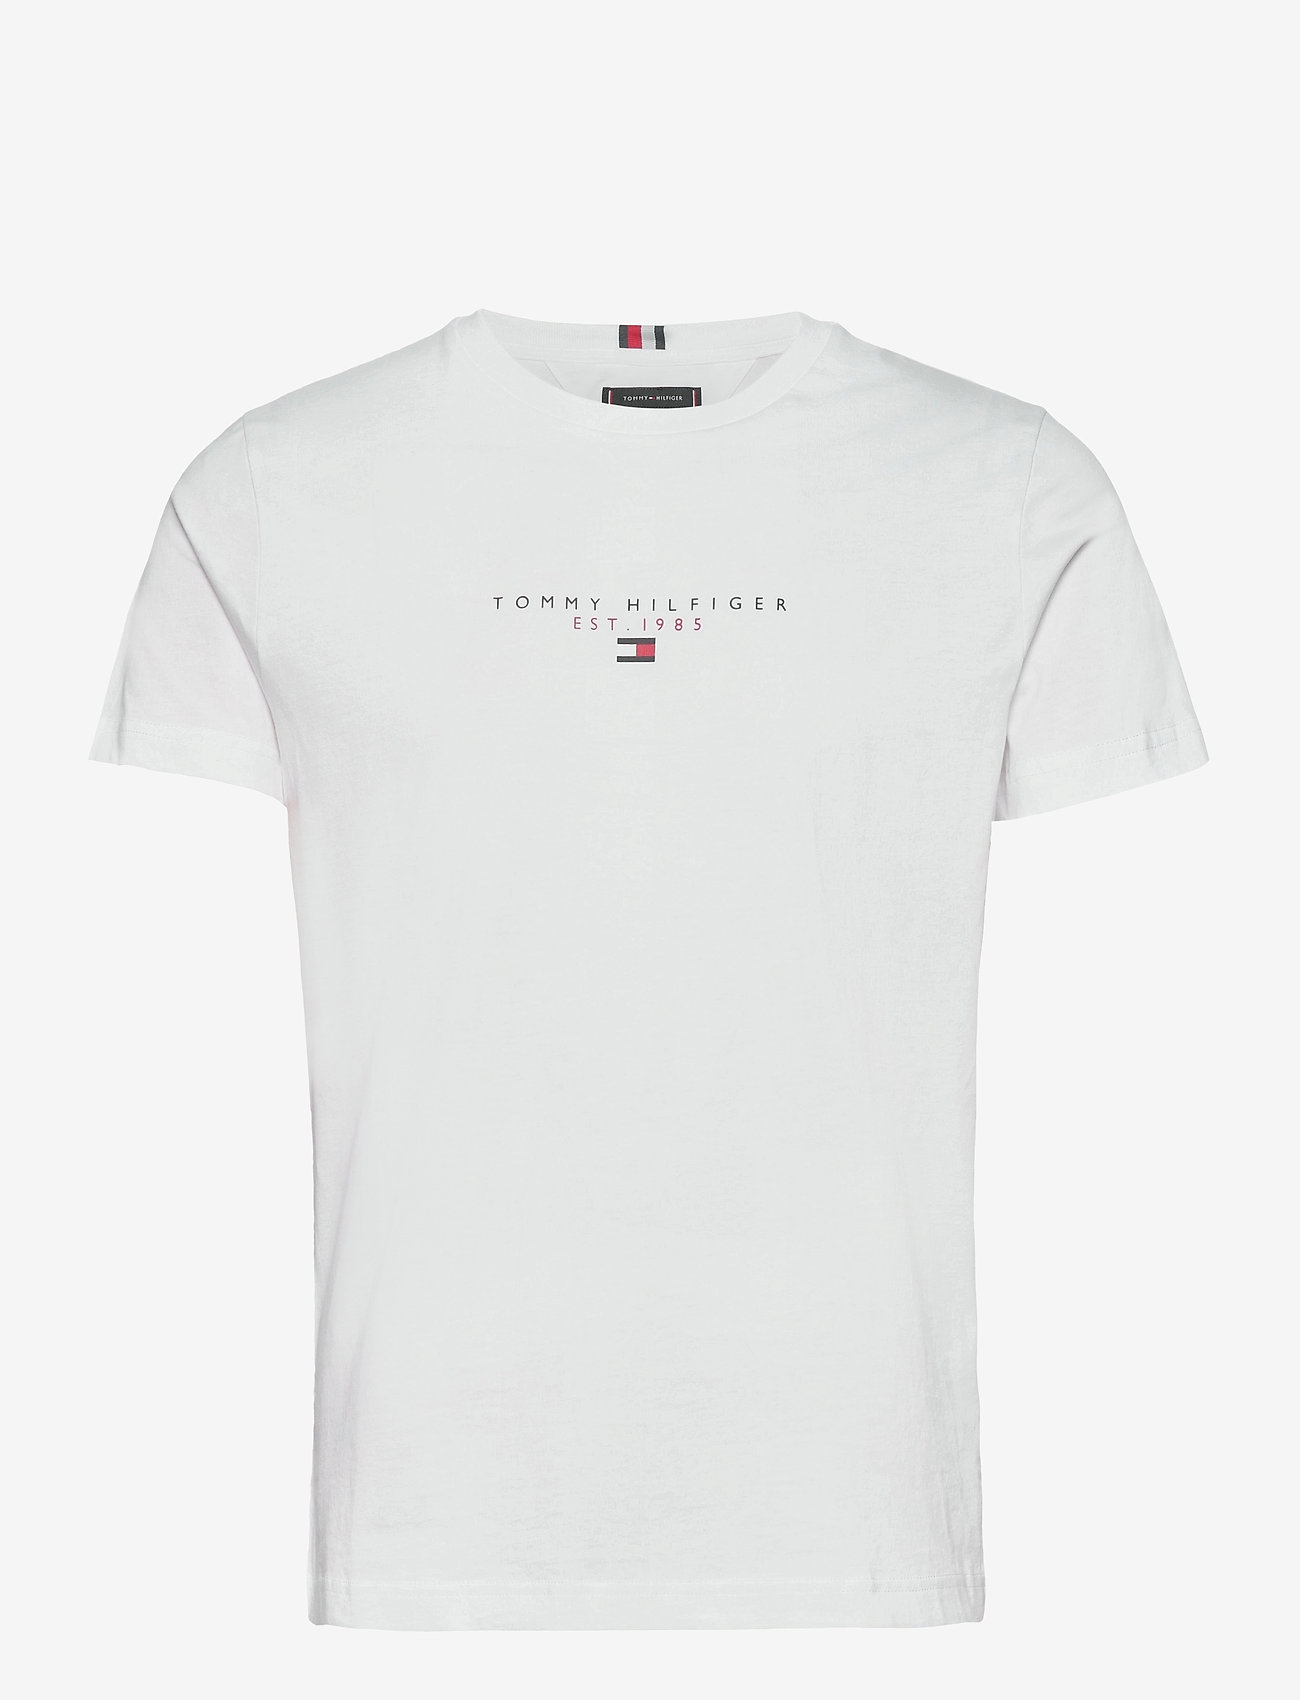 Essential Tommy Tee (White) (39.90 